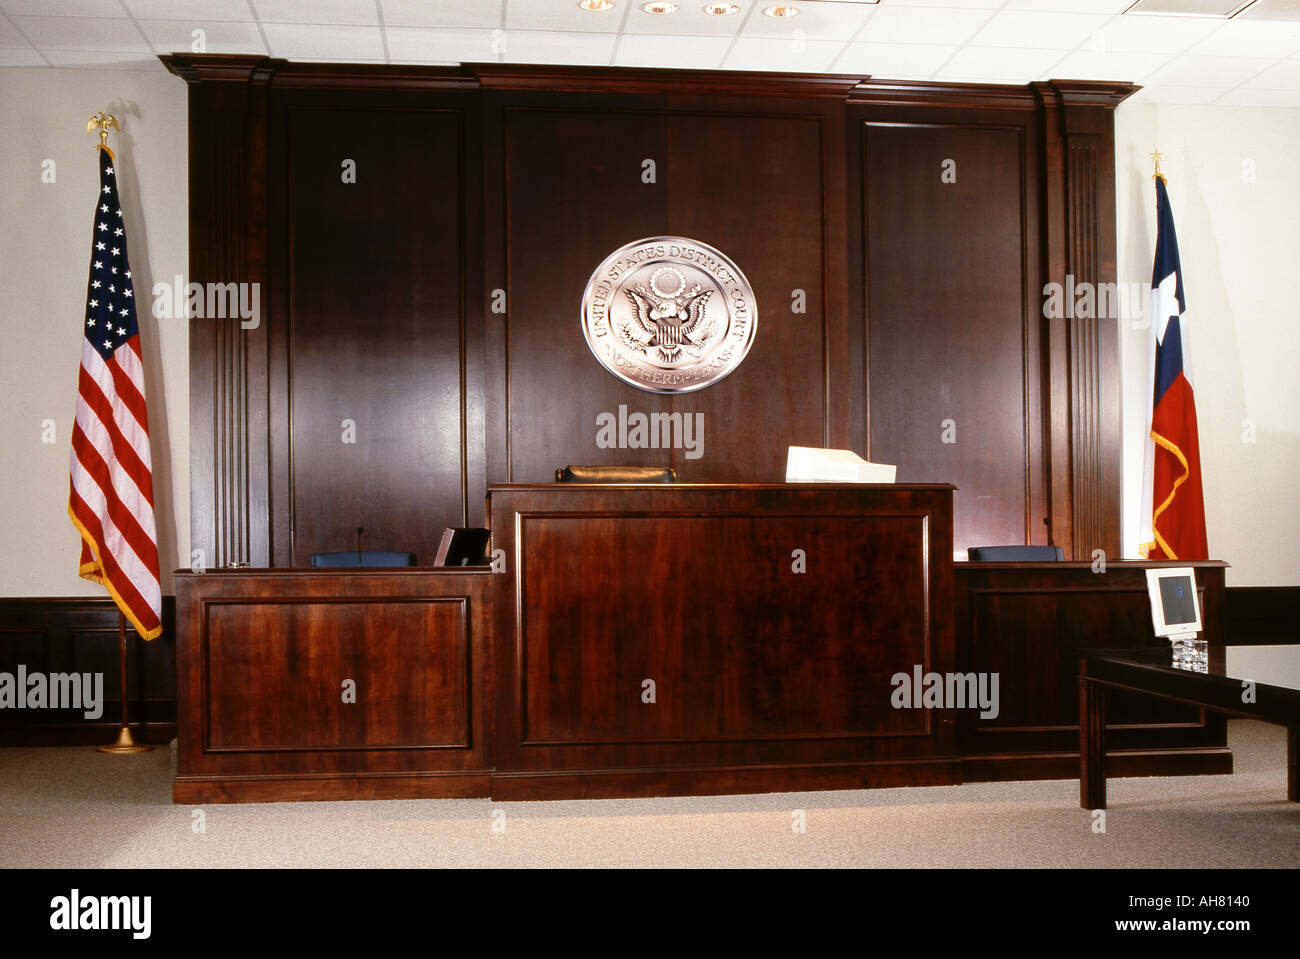 Courtroom And Judges Bench In Courthouse Stock Photo Alamy